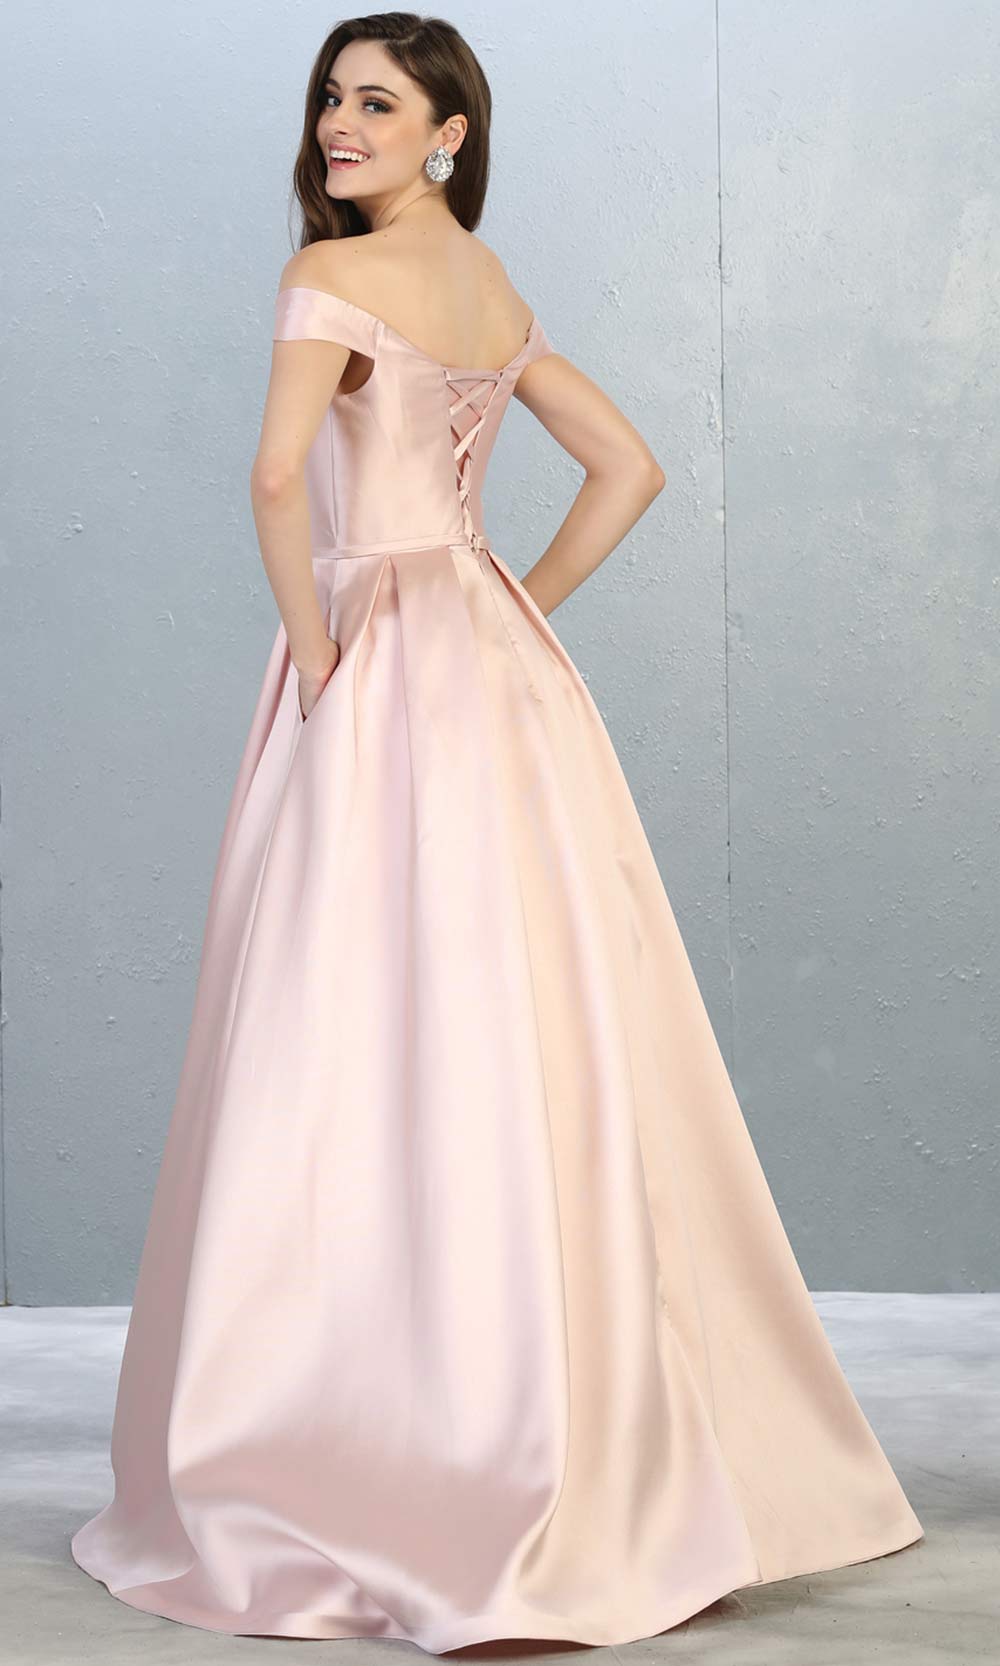 Mayqueen MQ 1784 long blush pink off shoulder evening flowy dress. Full length light pink satin taffeta gown is perfect for  enagagement/e-shoot dress, formal wedding guest, indowestern gown, evening party dress, prom, bridesmaid. Plus sizes avail-b.jpg